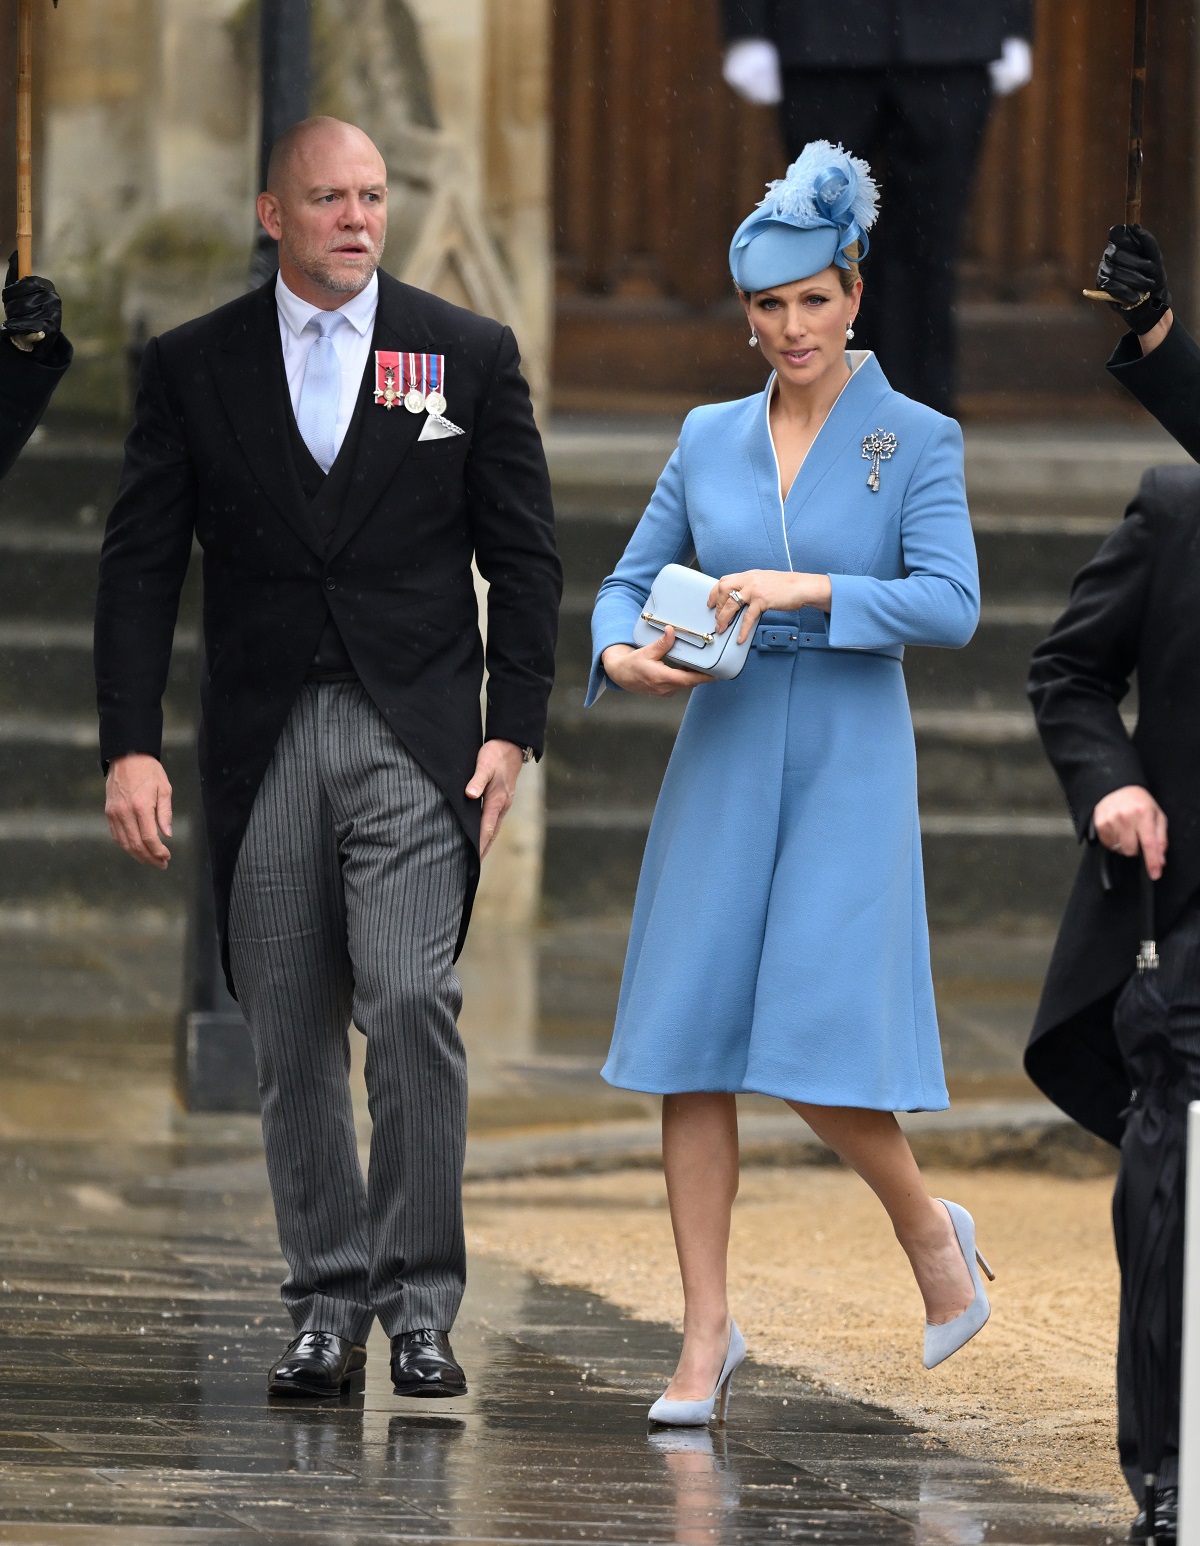 Mike and Zara Tindall arriving ahead of the coronation ceremony of King Charles III and Queen Camilla at Westminster Abbey